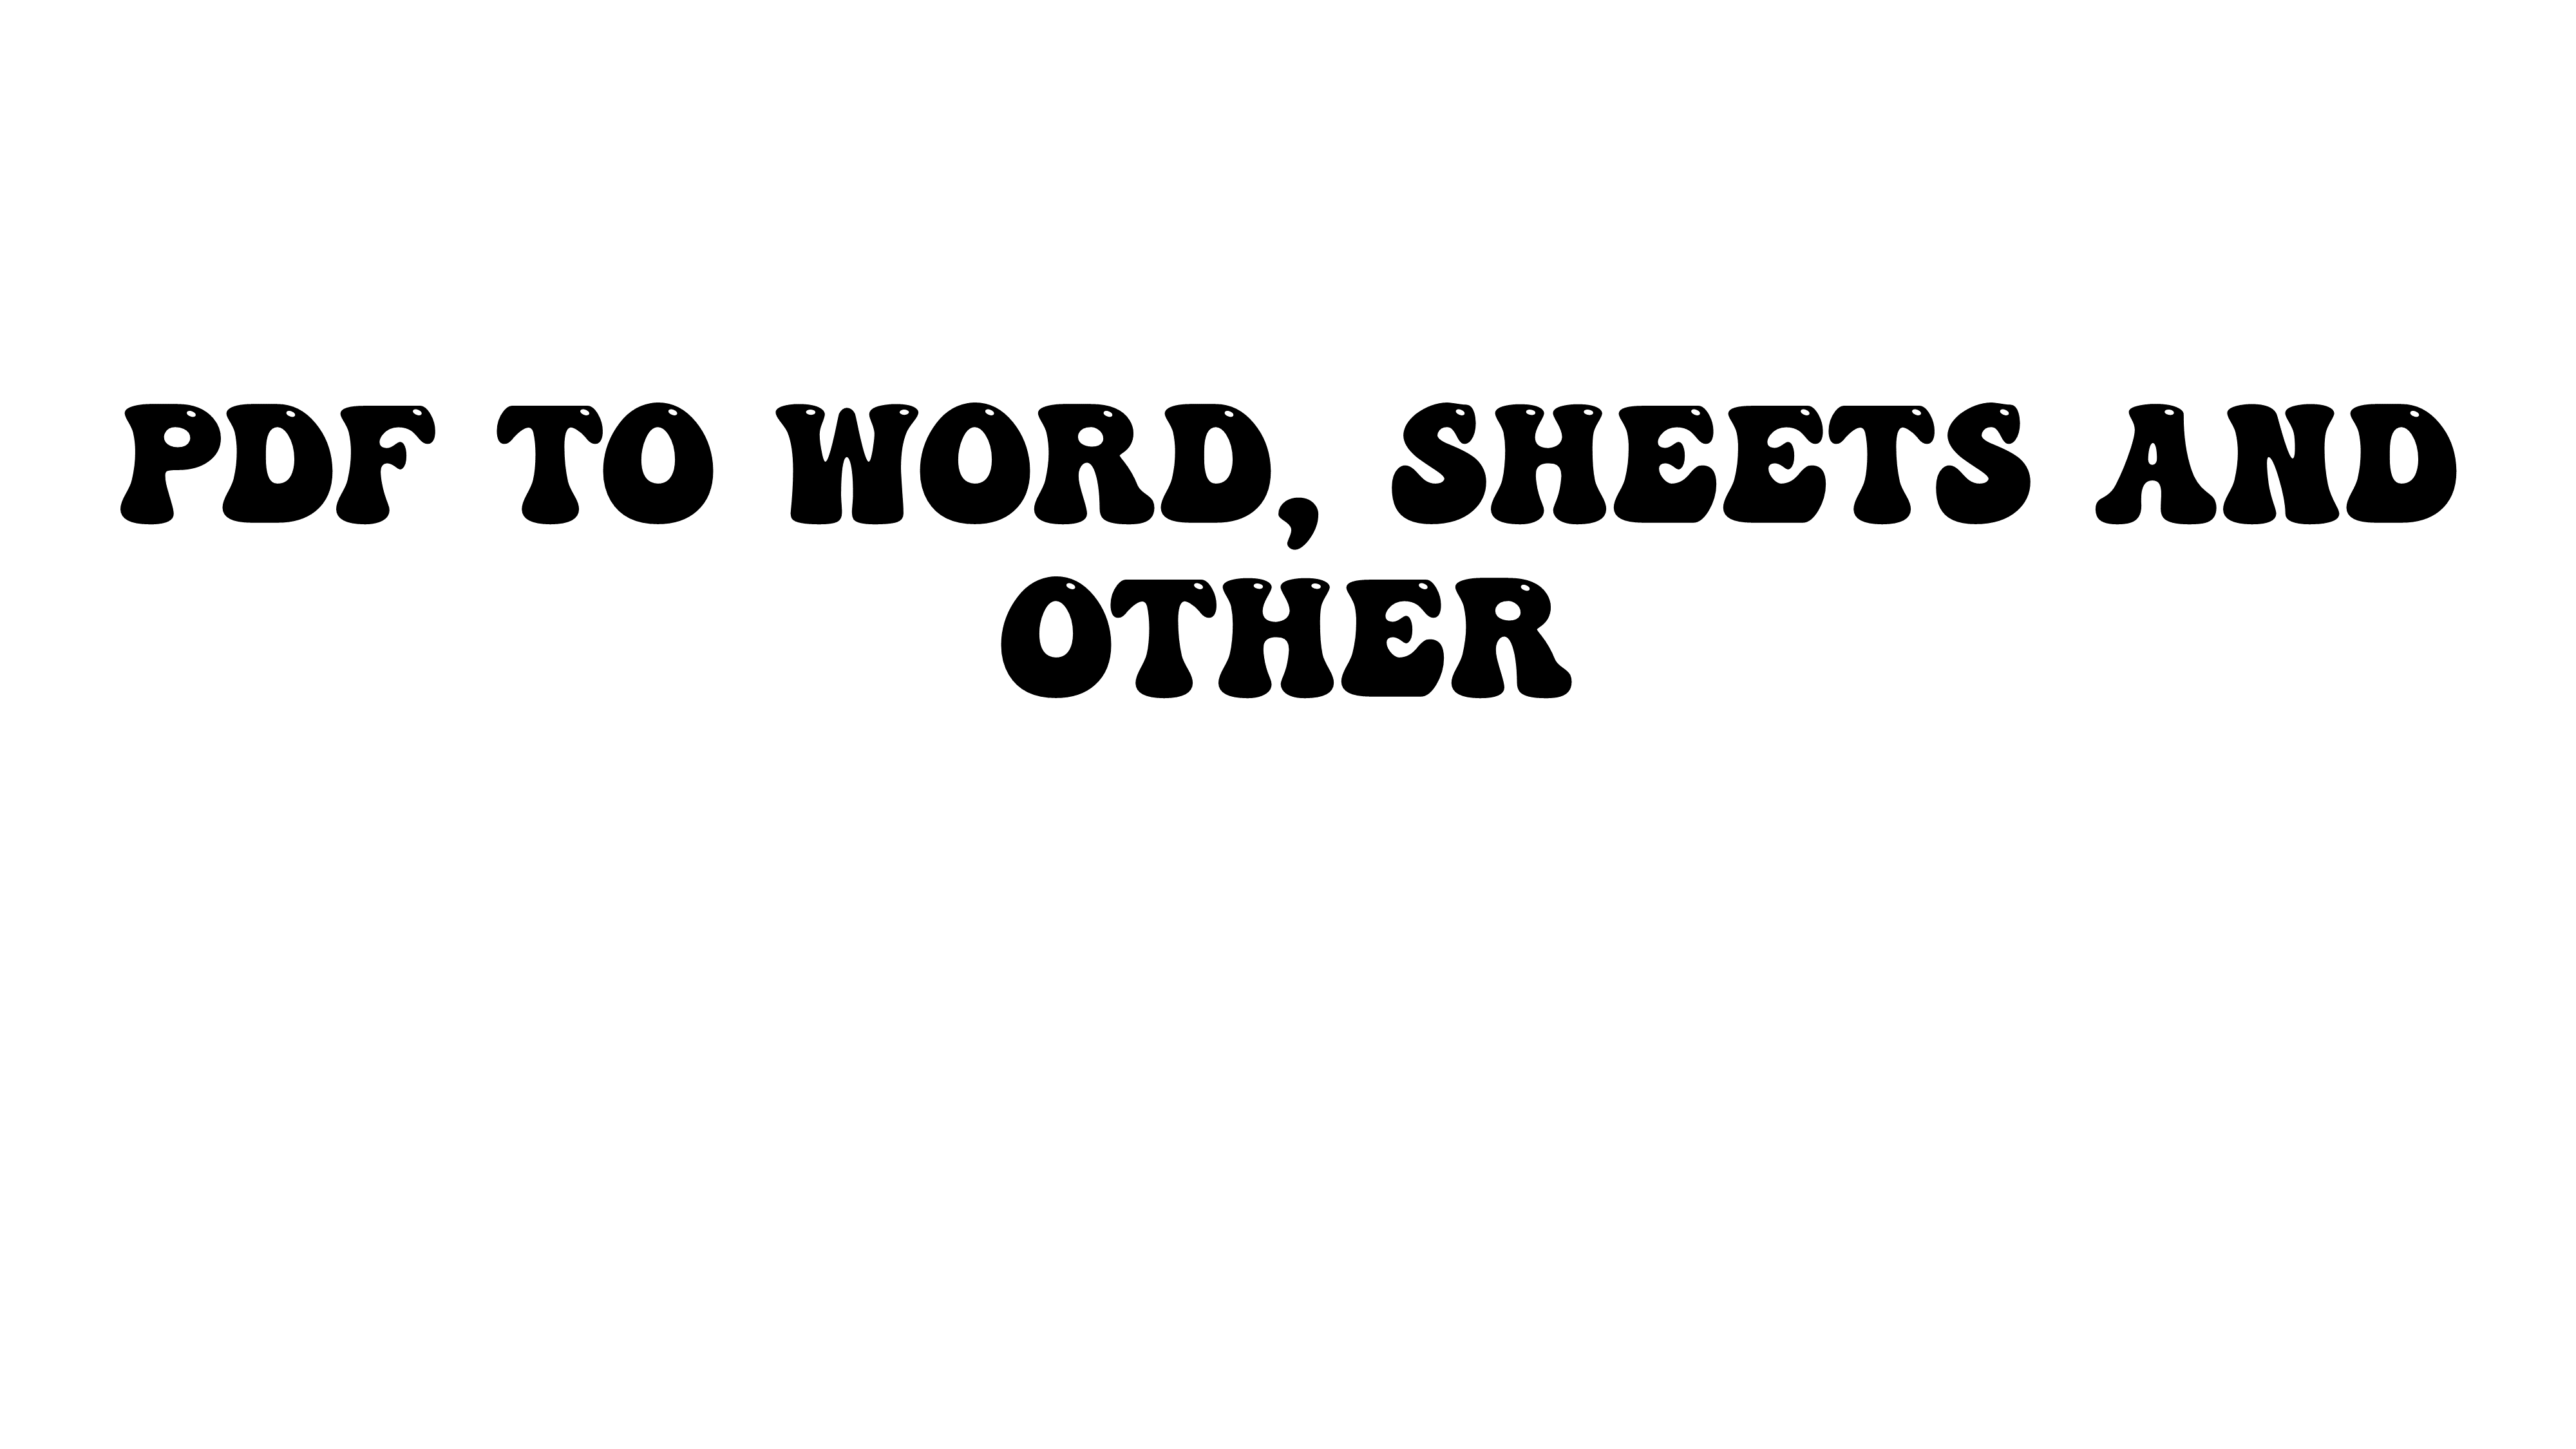 Typing / Retype PDF to Word
Hand Written Notes to Word